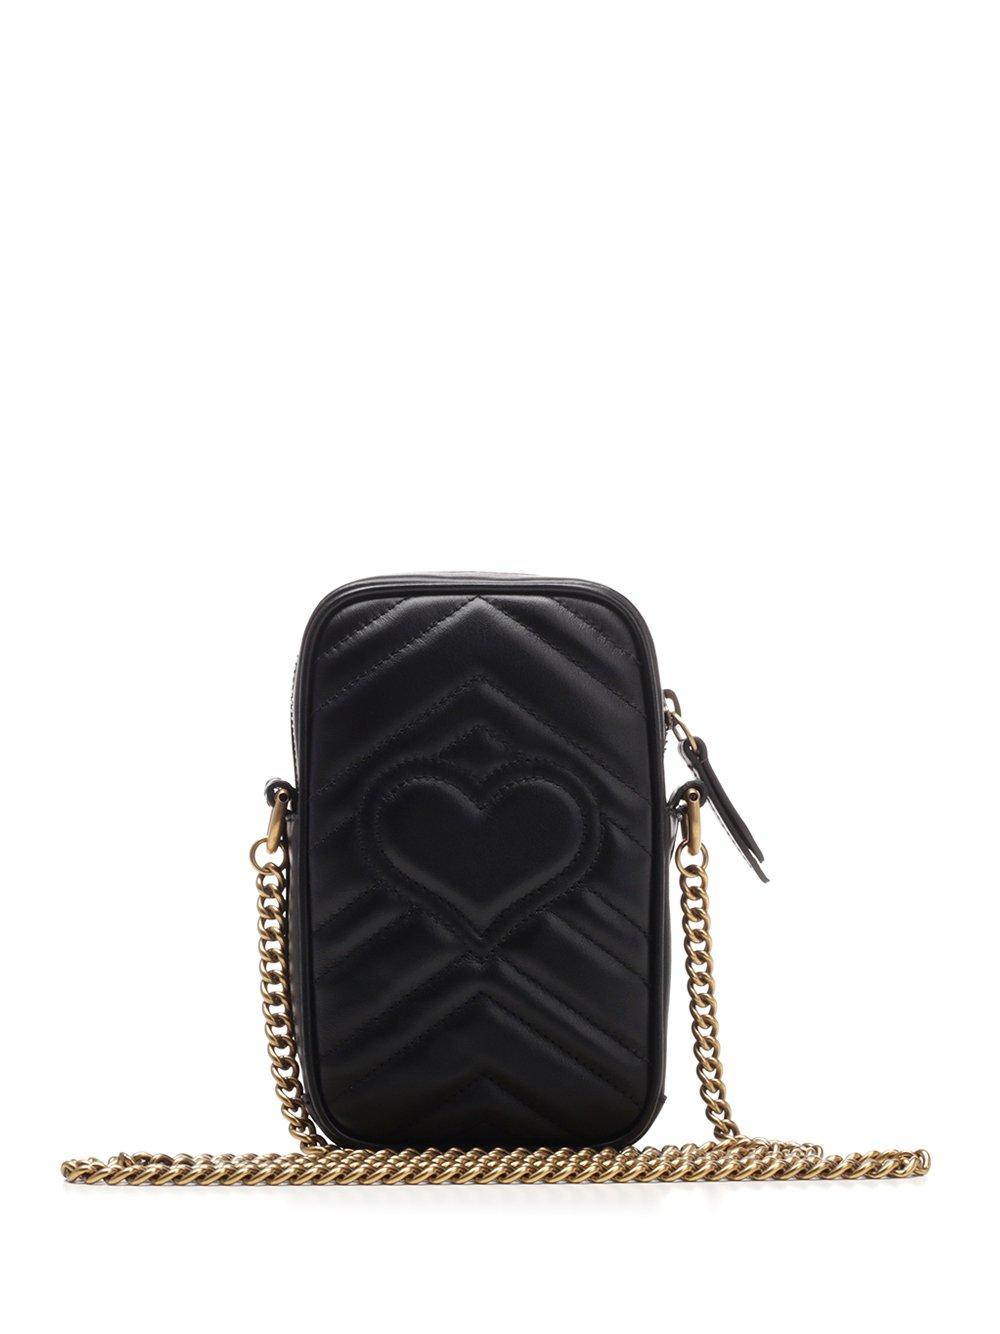 Gucci GG Marmont Mini Leather Shoulder Bag in Black - Save 56% | Lyst